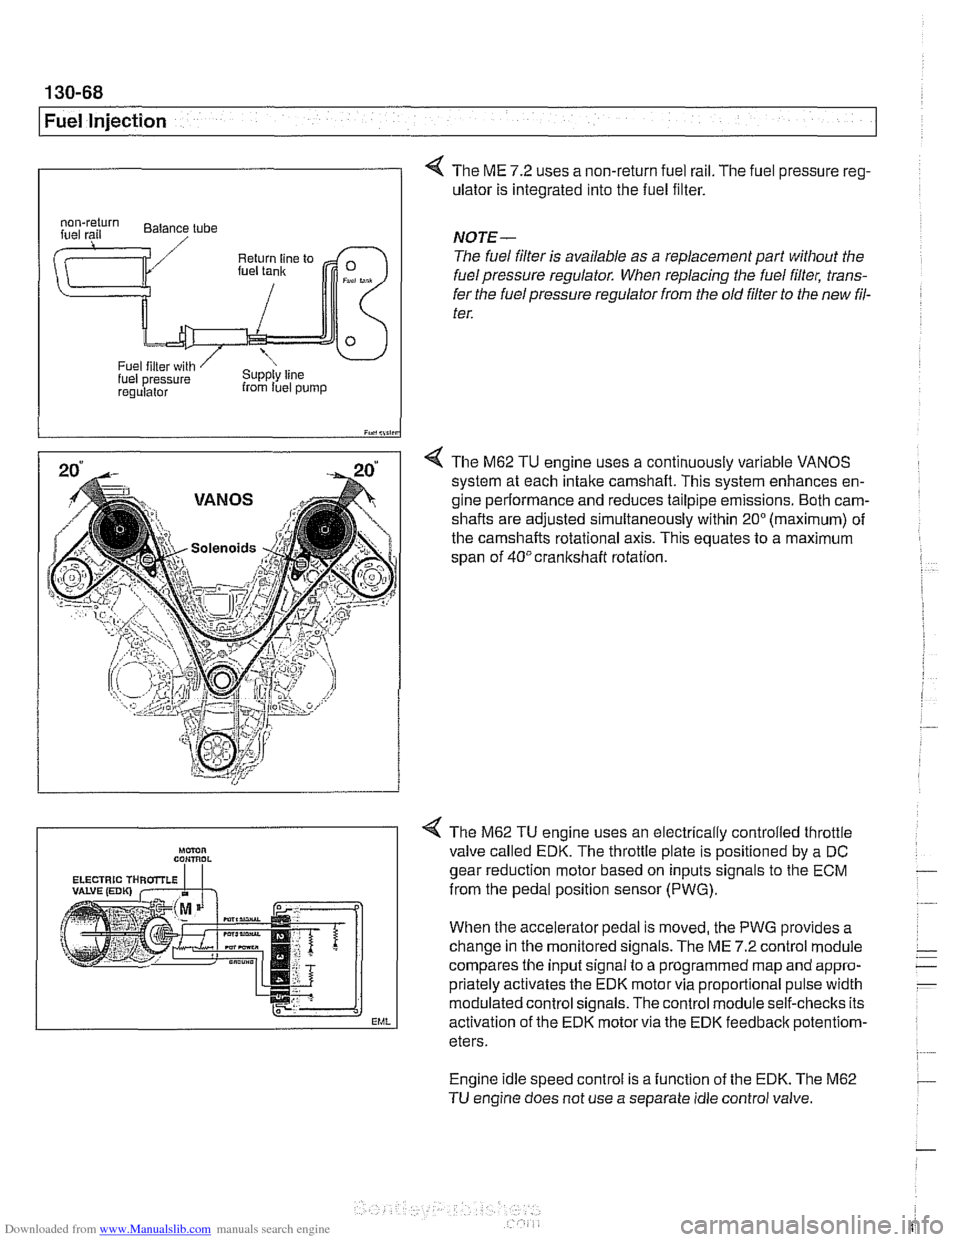 BMW 530i 2001 E39 Workshop Manual Downloaded from www.Manualslib.com manuals search engine 
130-68 
Fuel Injection 
0 
4 The ME 7.2 uses  a non-return  fuel rail. The fuel pressure  reg- 
ulator is  integrated  into the fuel  filter. 